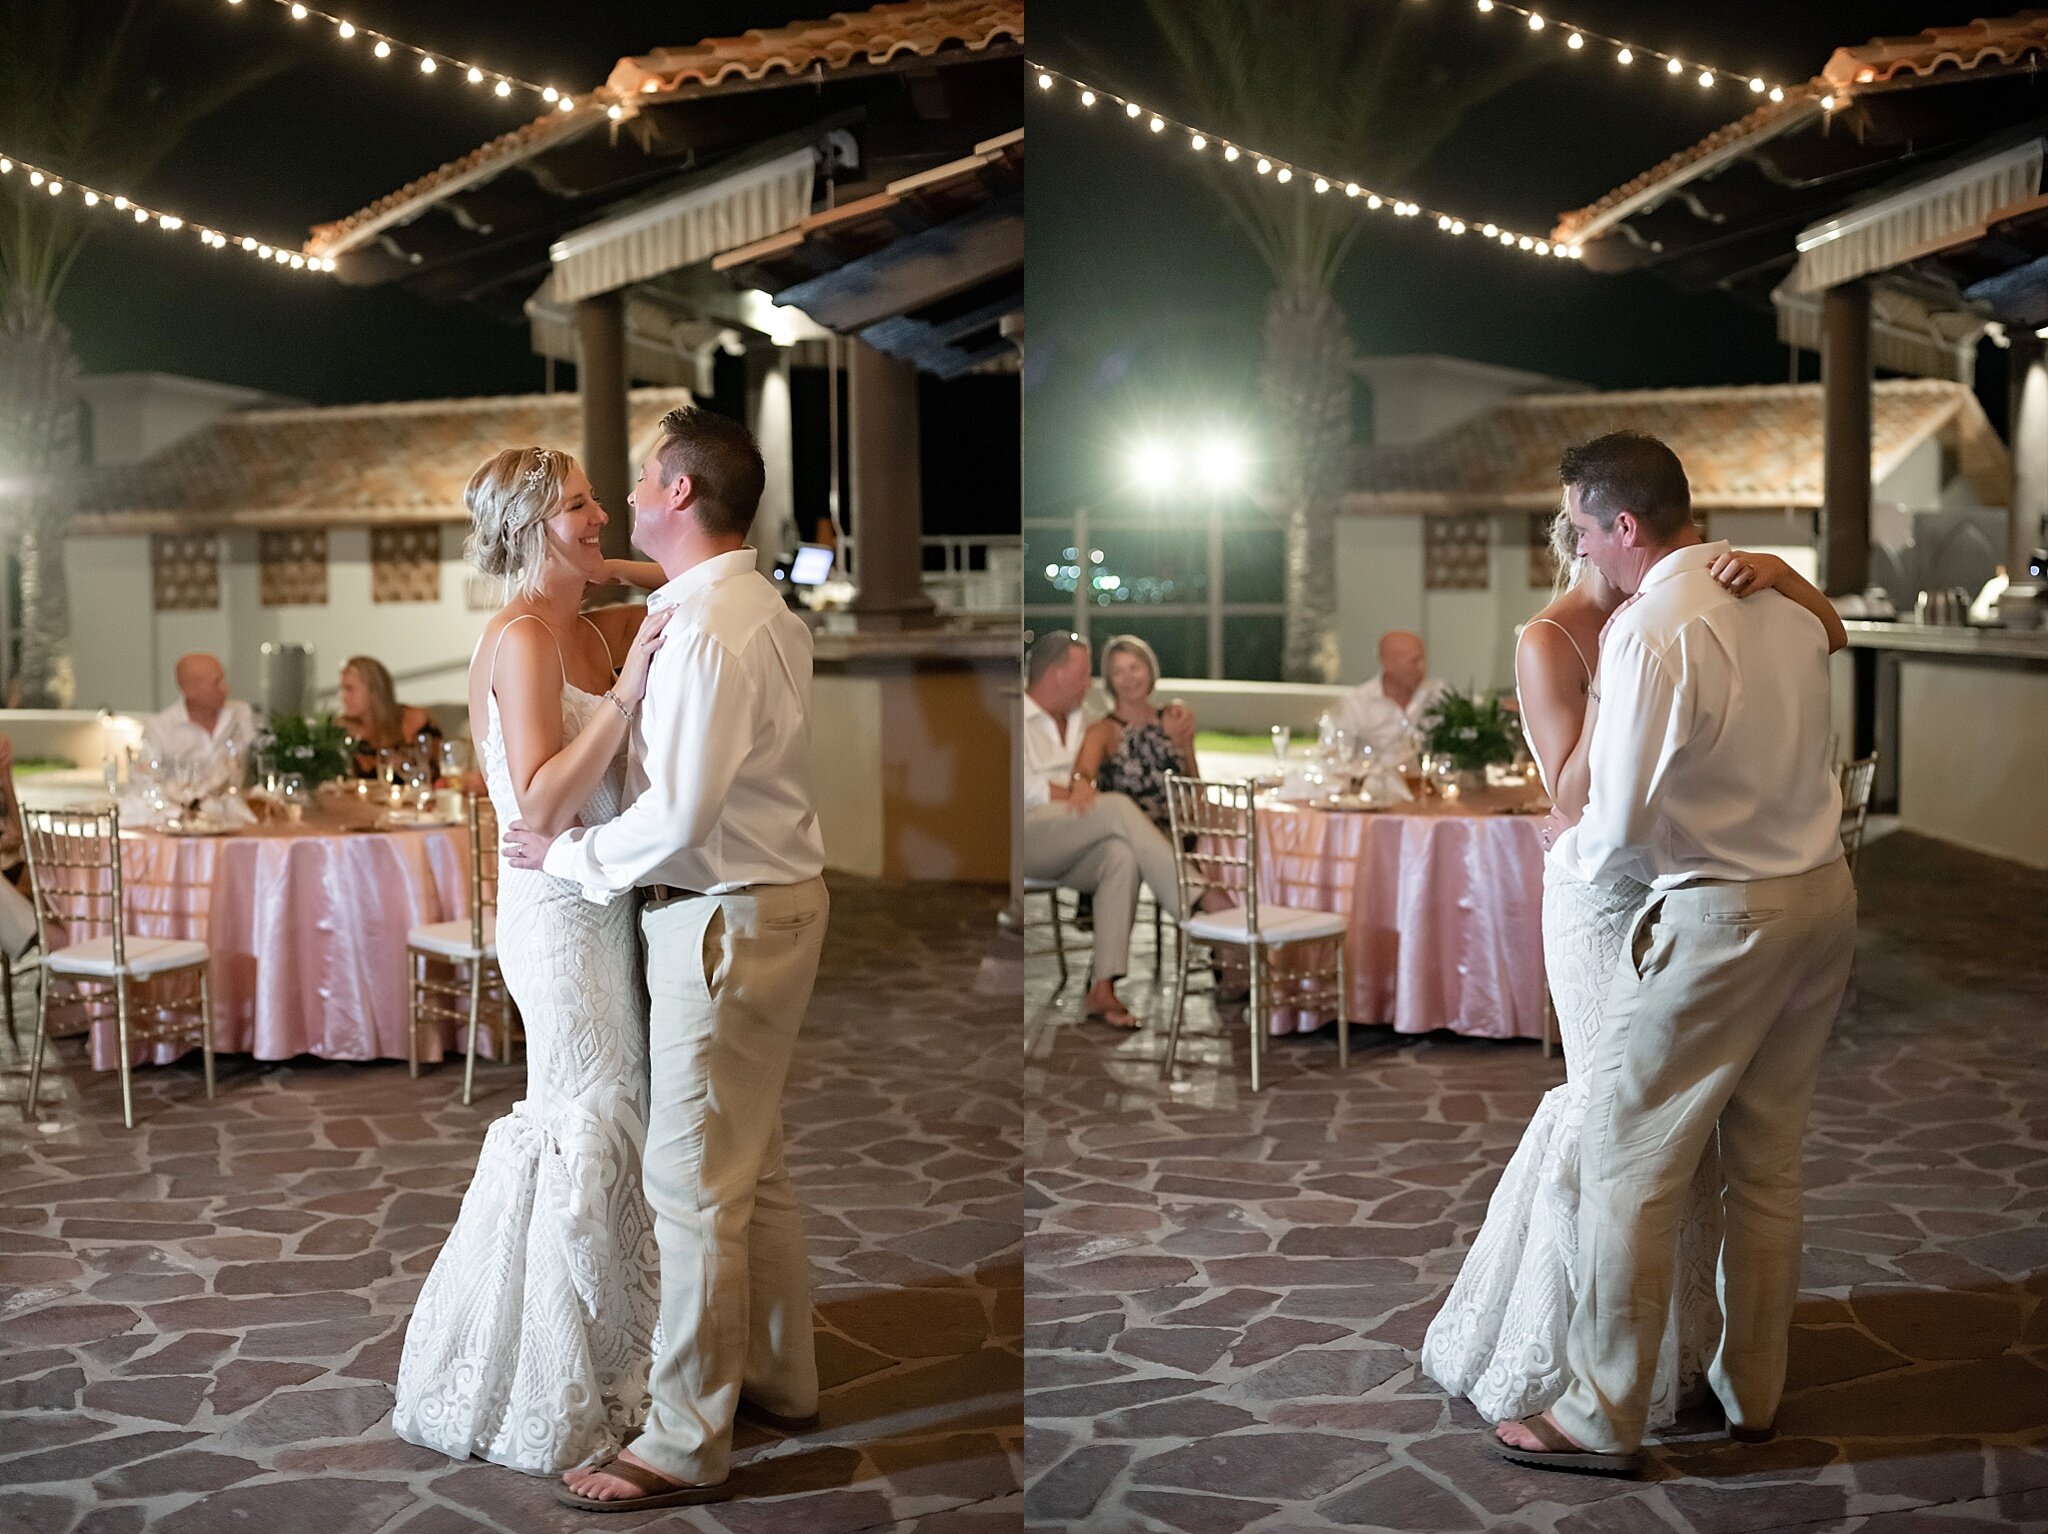 first dance at rooftop poolside wedding reception destination pueblo bonito sunset beach mexico